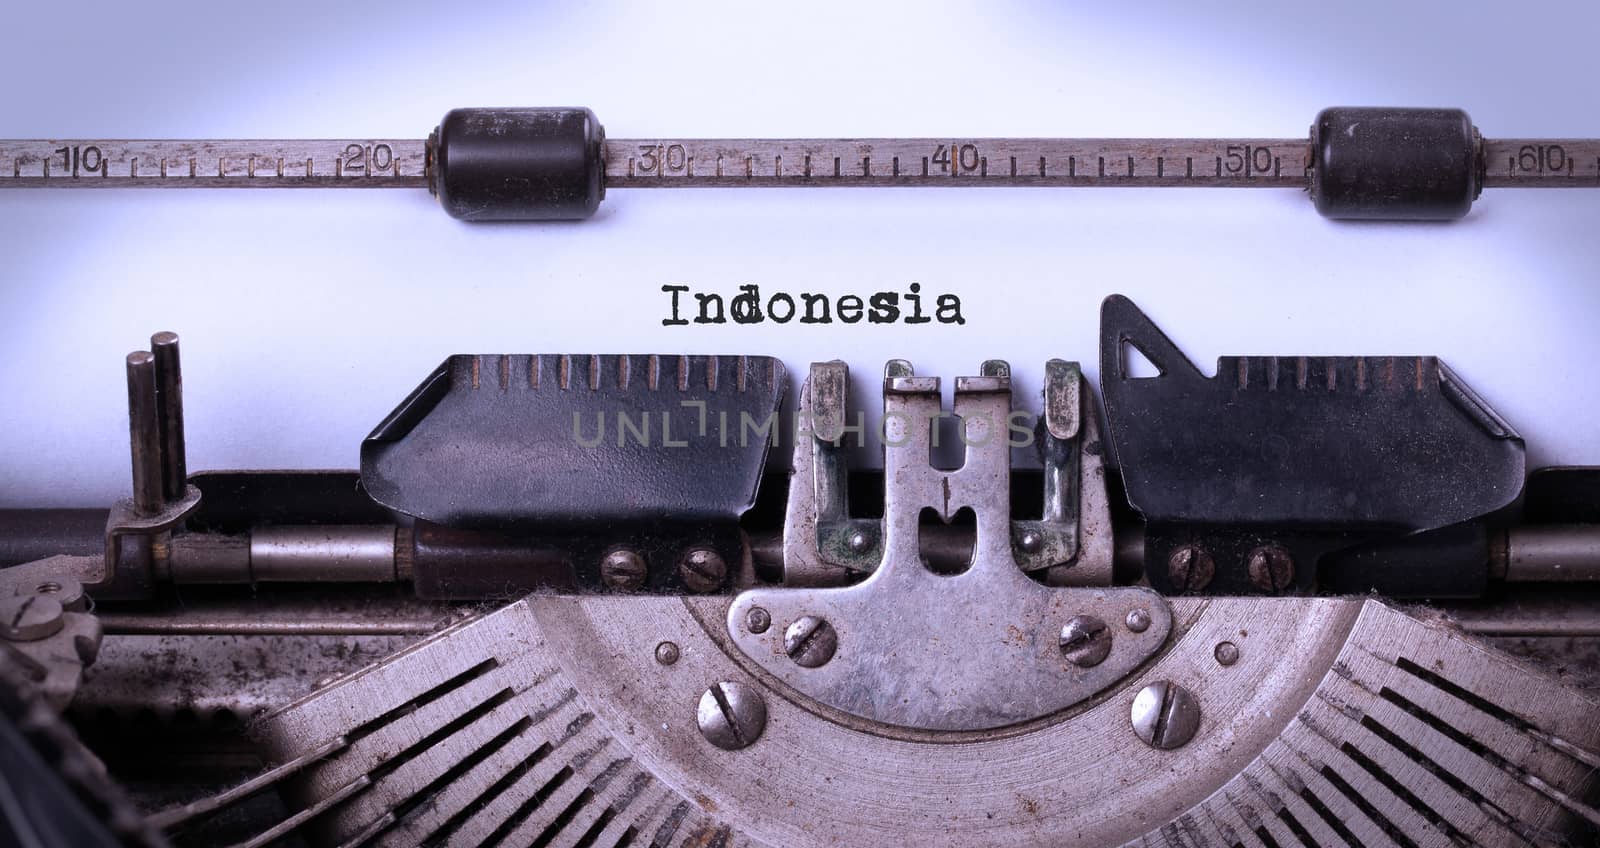 Old typewriter - Indonesia by michaklootwijk